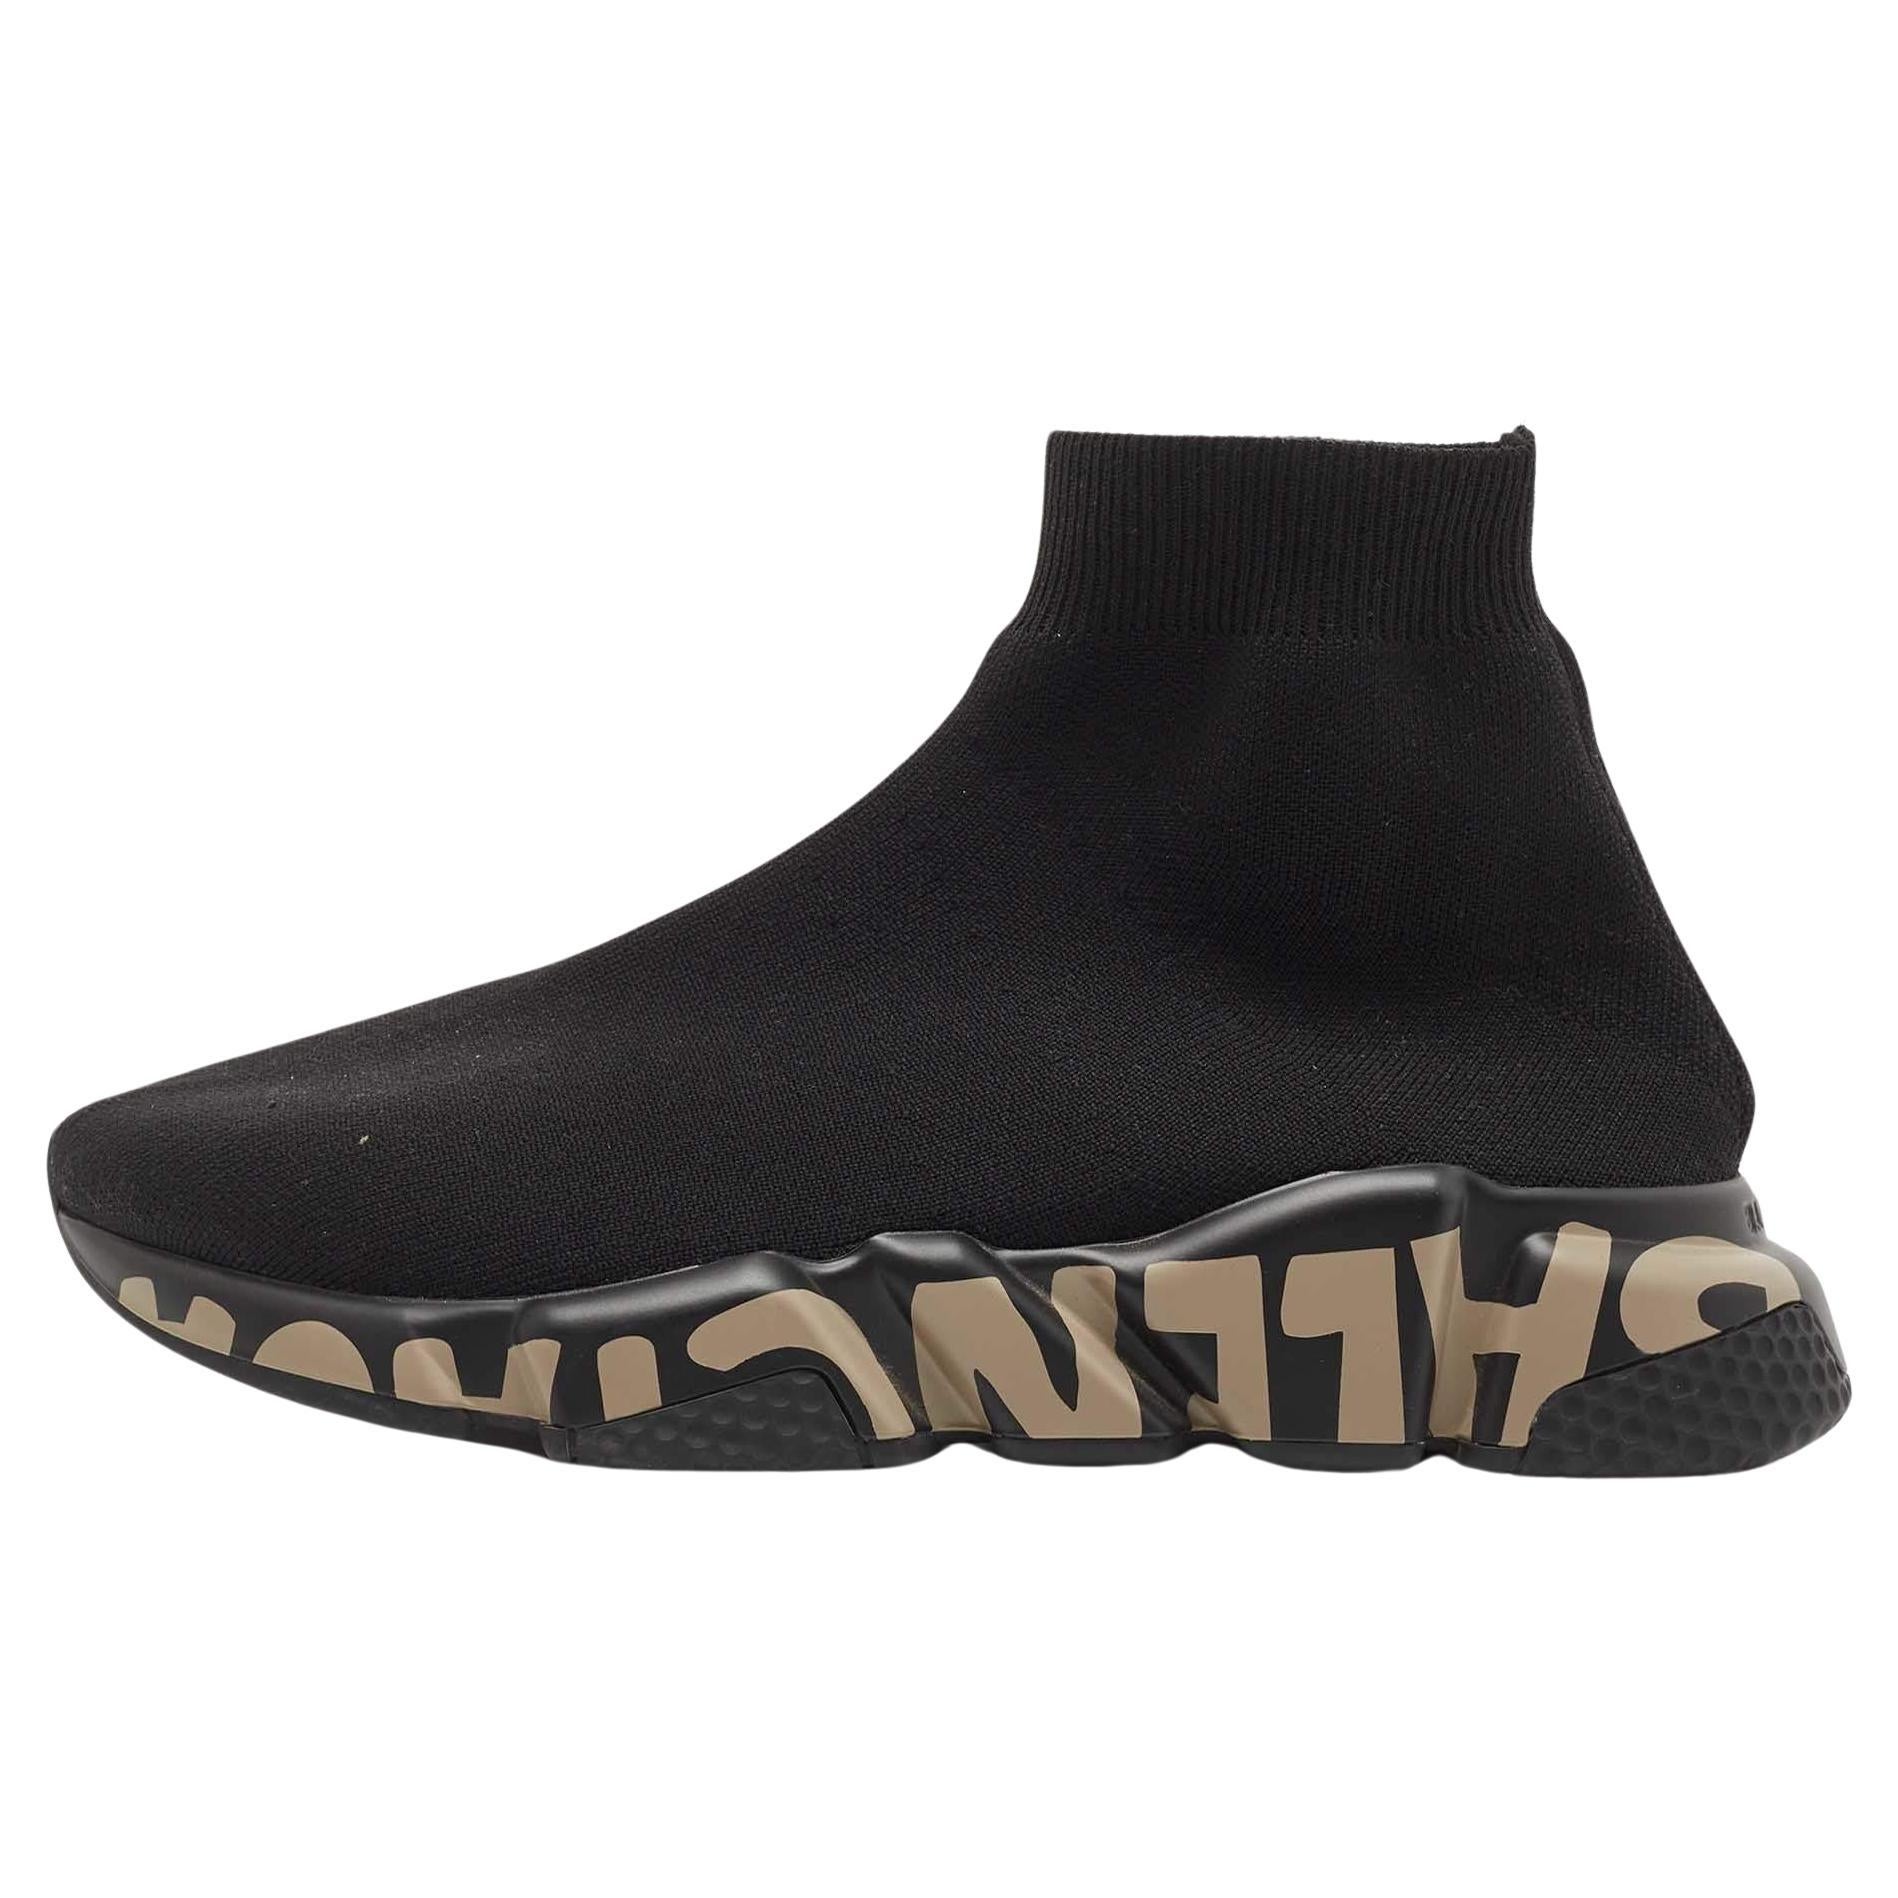 Balenciaga Black Knit Fabric Speed Trainer Sneakers 